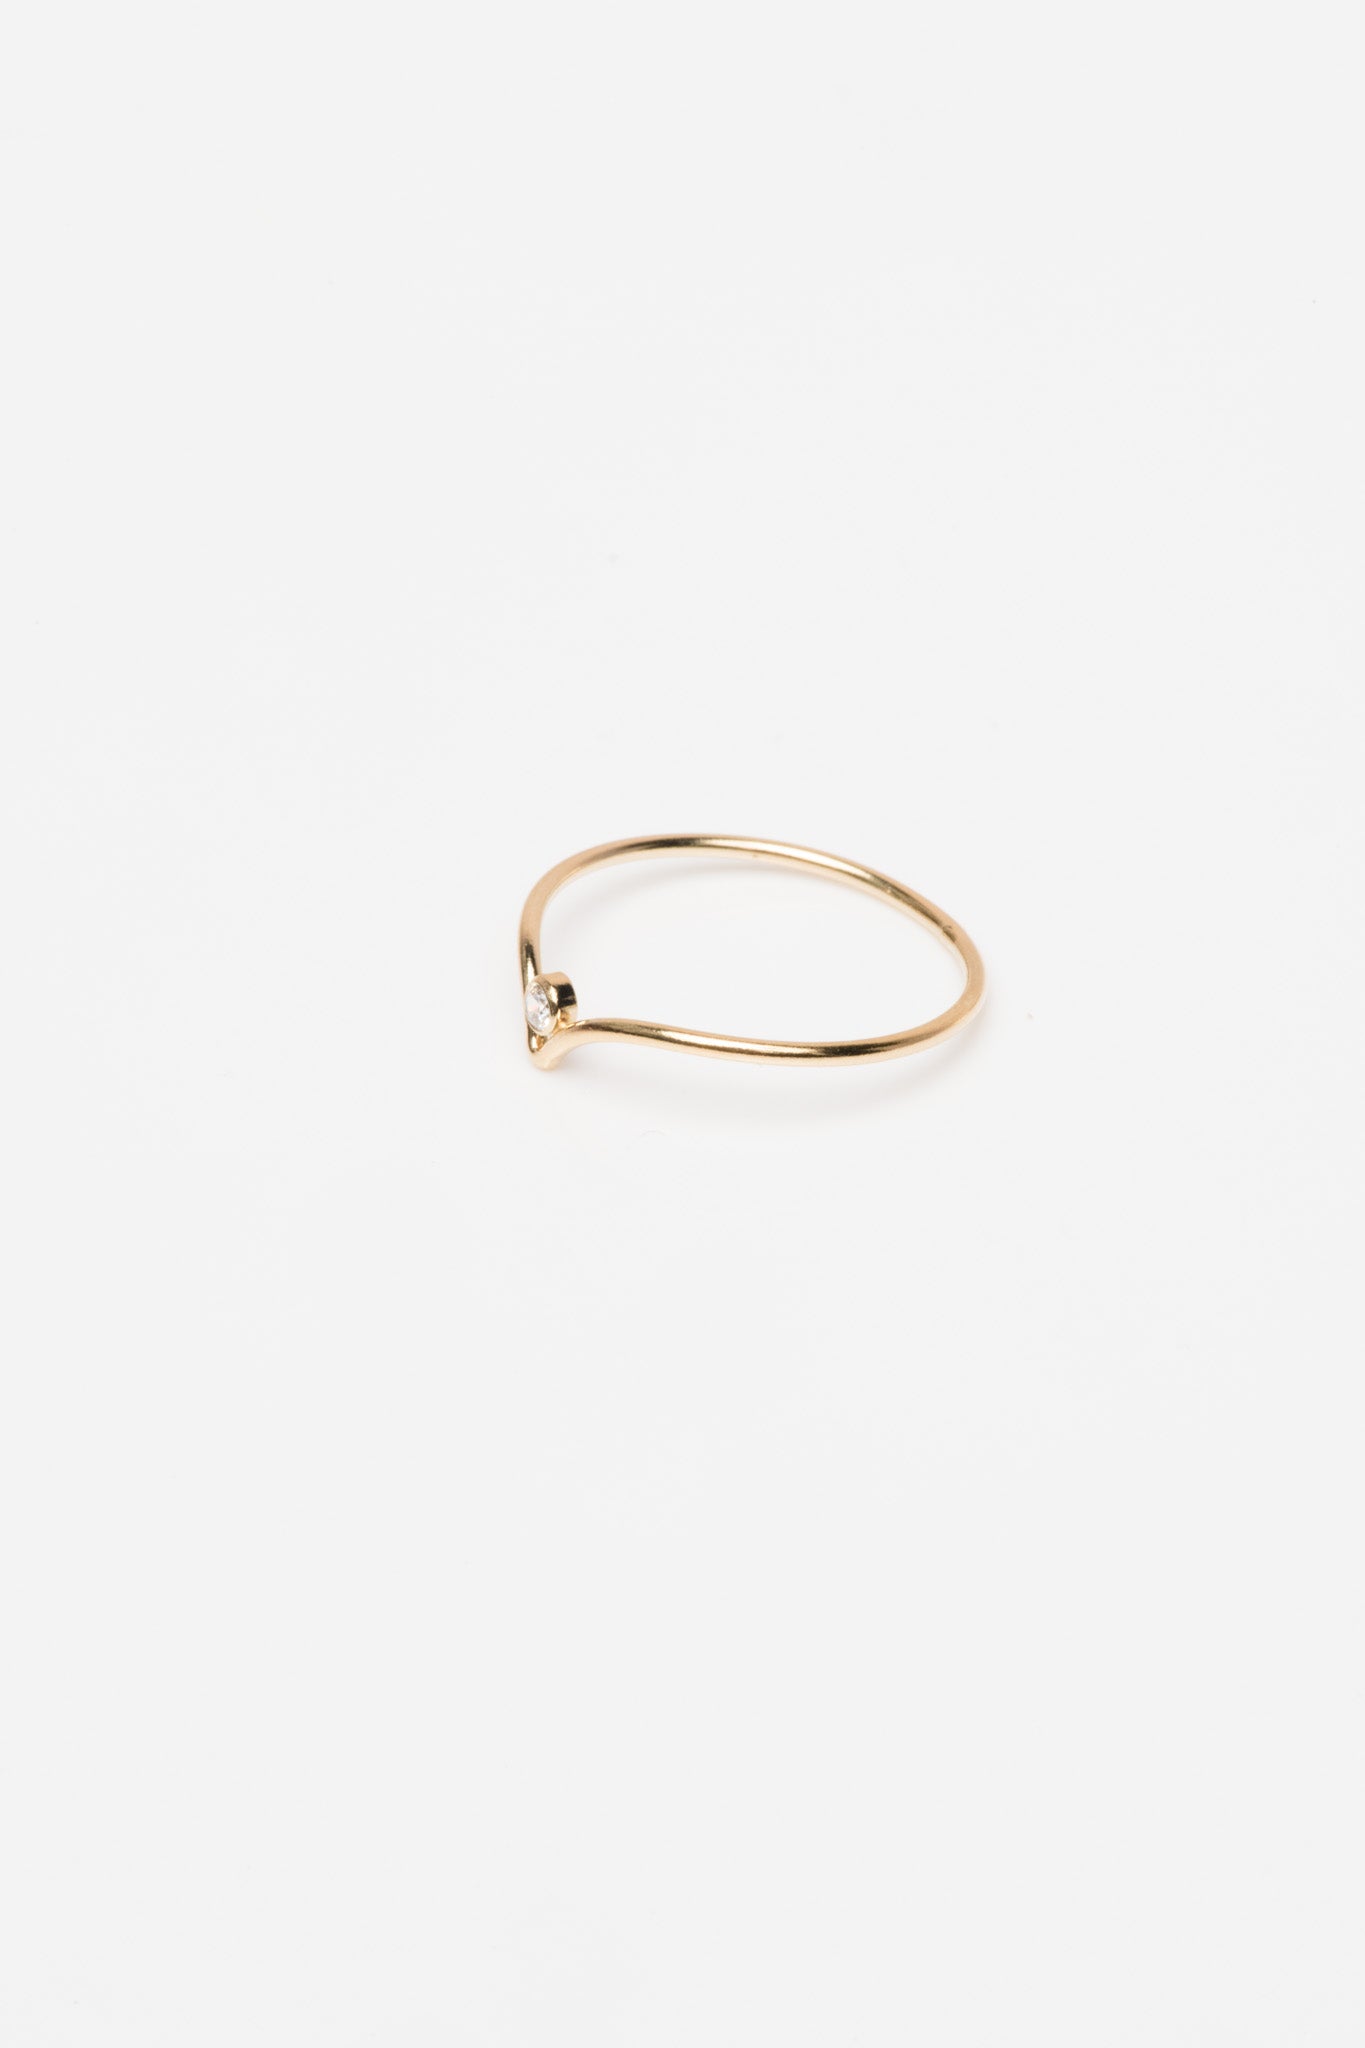 Able Diana Ring